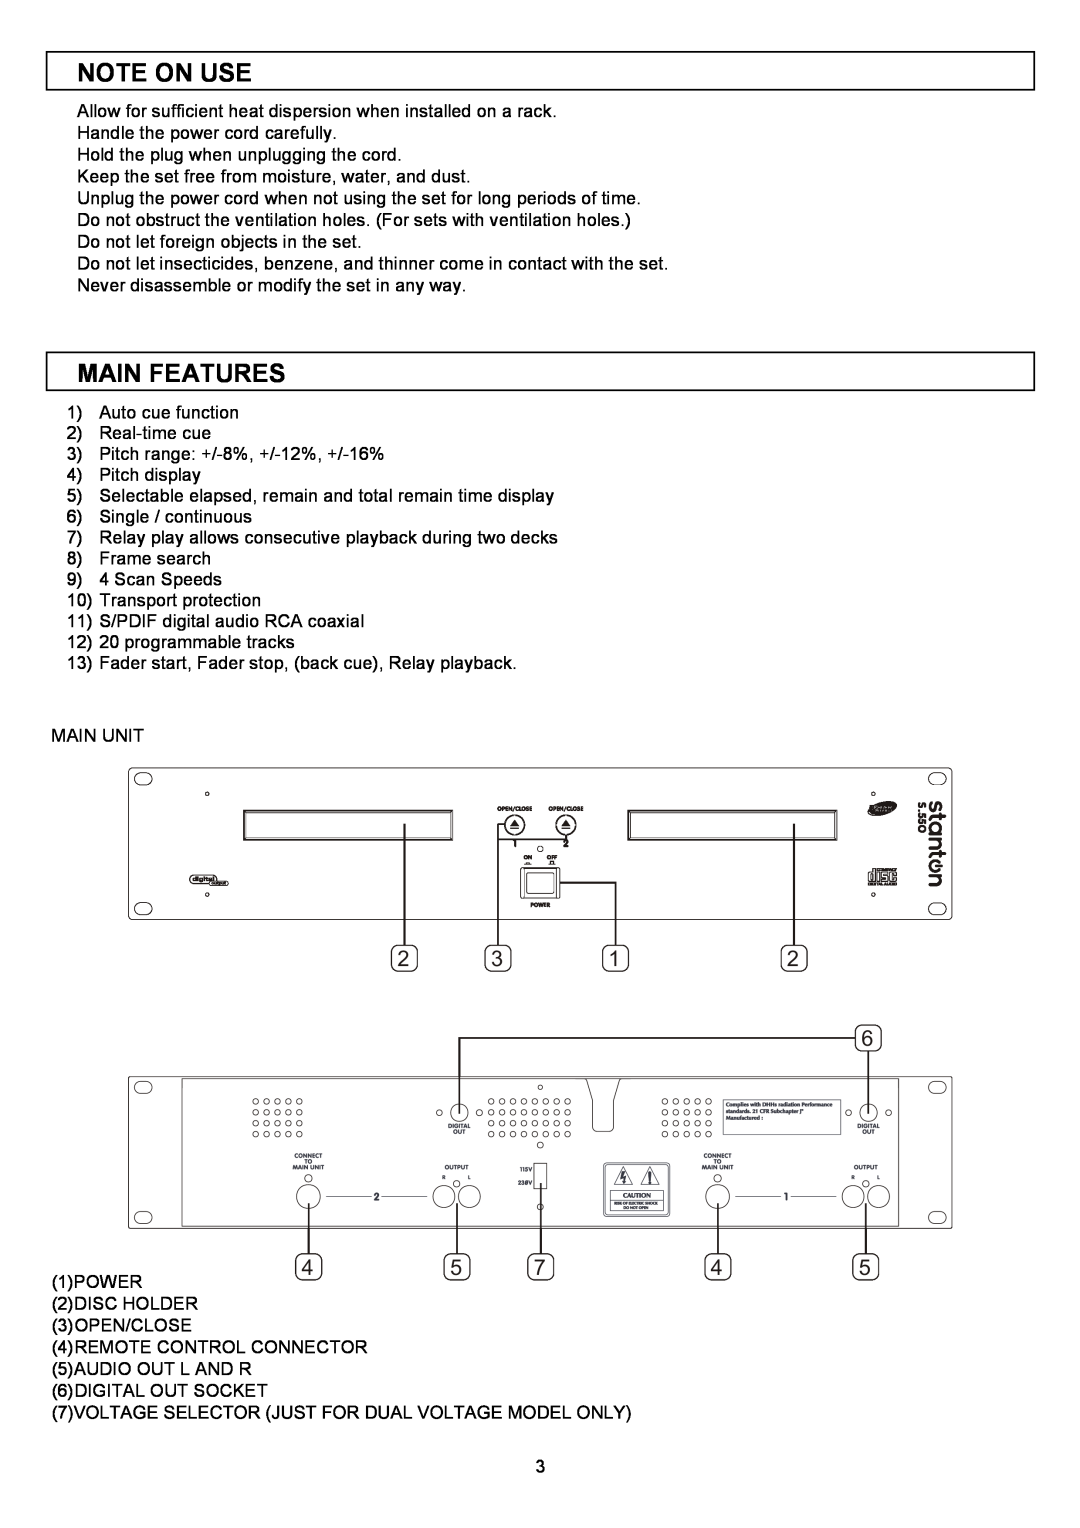 Stanton S.550 user manual Note On Use, Main Features 